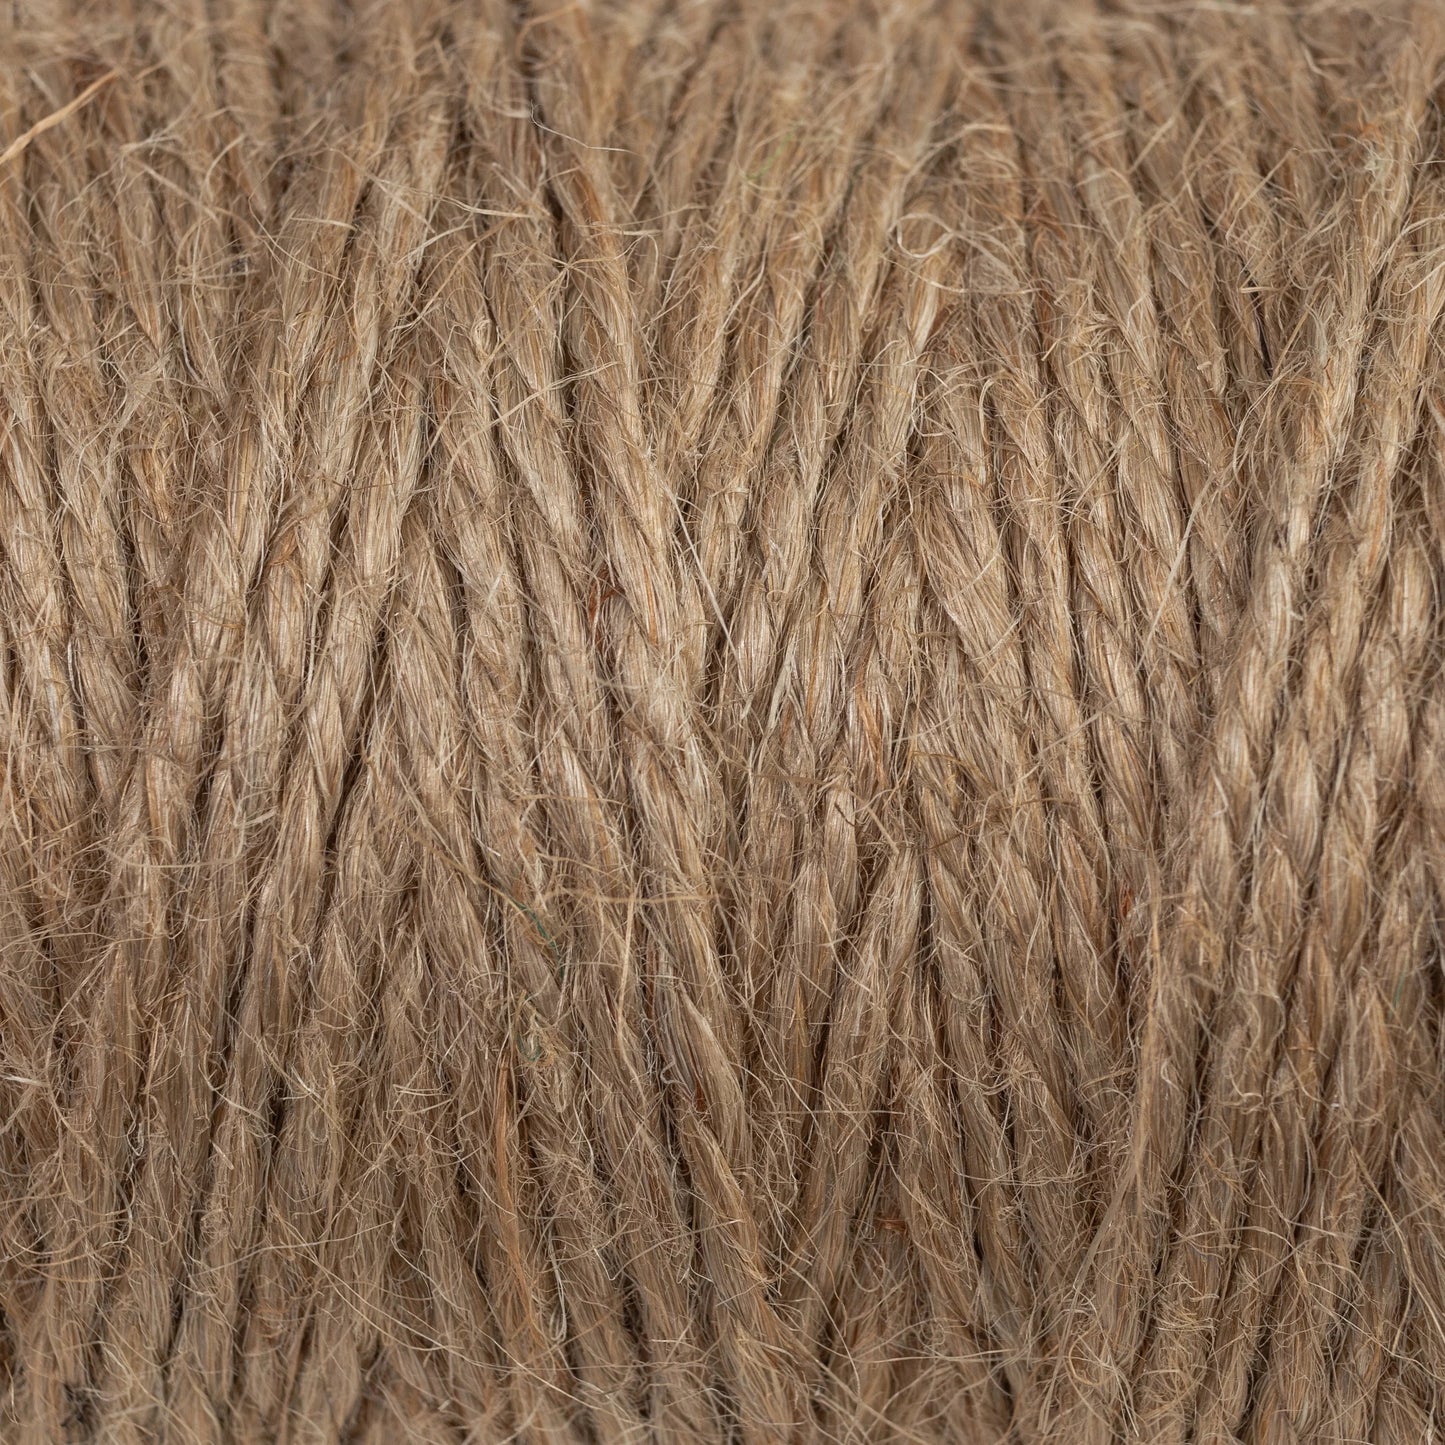 Large Spool Natural 3ply Jute Twine 600m